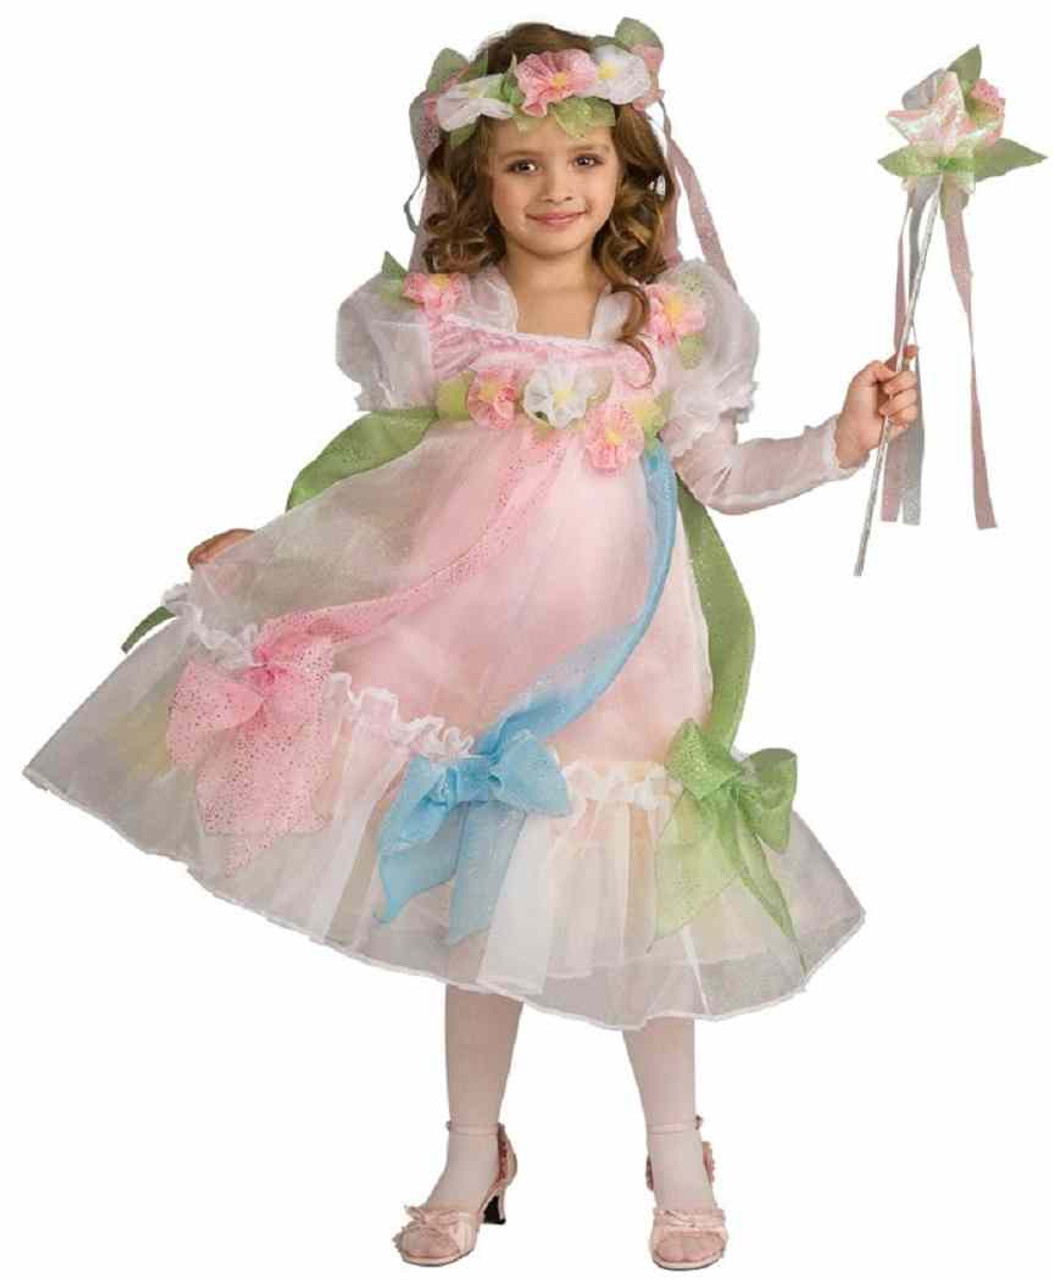 Buy BookMyCostume Yellow Flower Kids Fancy Dress Costume 4-5 years Online  at Low Prices in India - Amazon.in